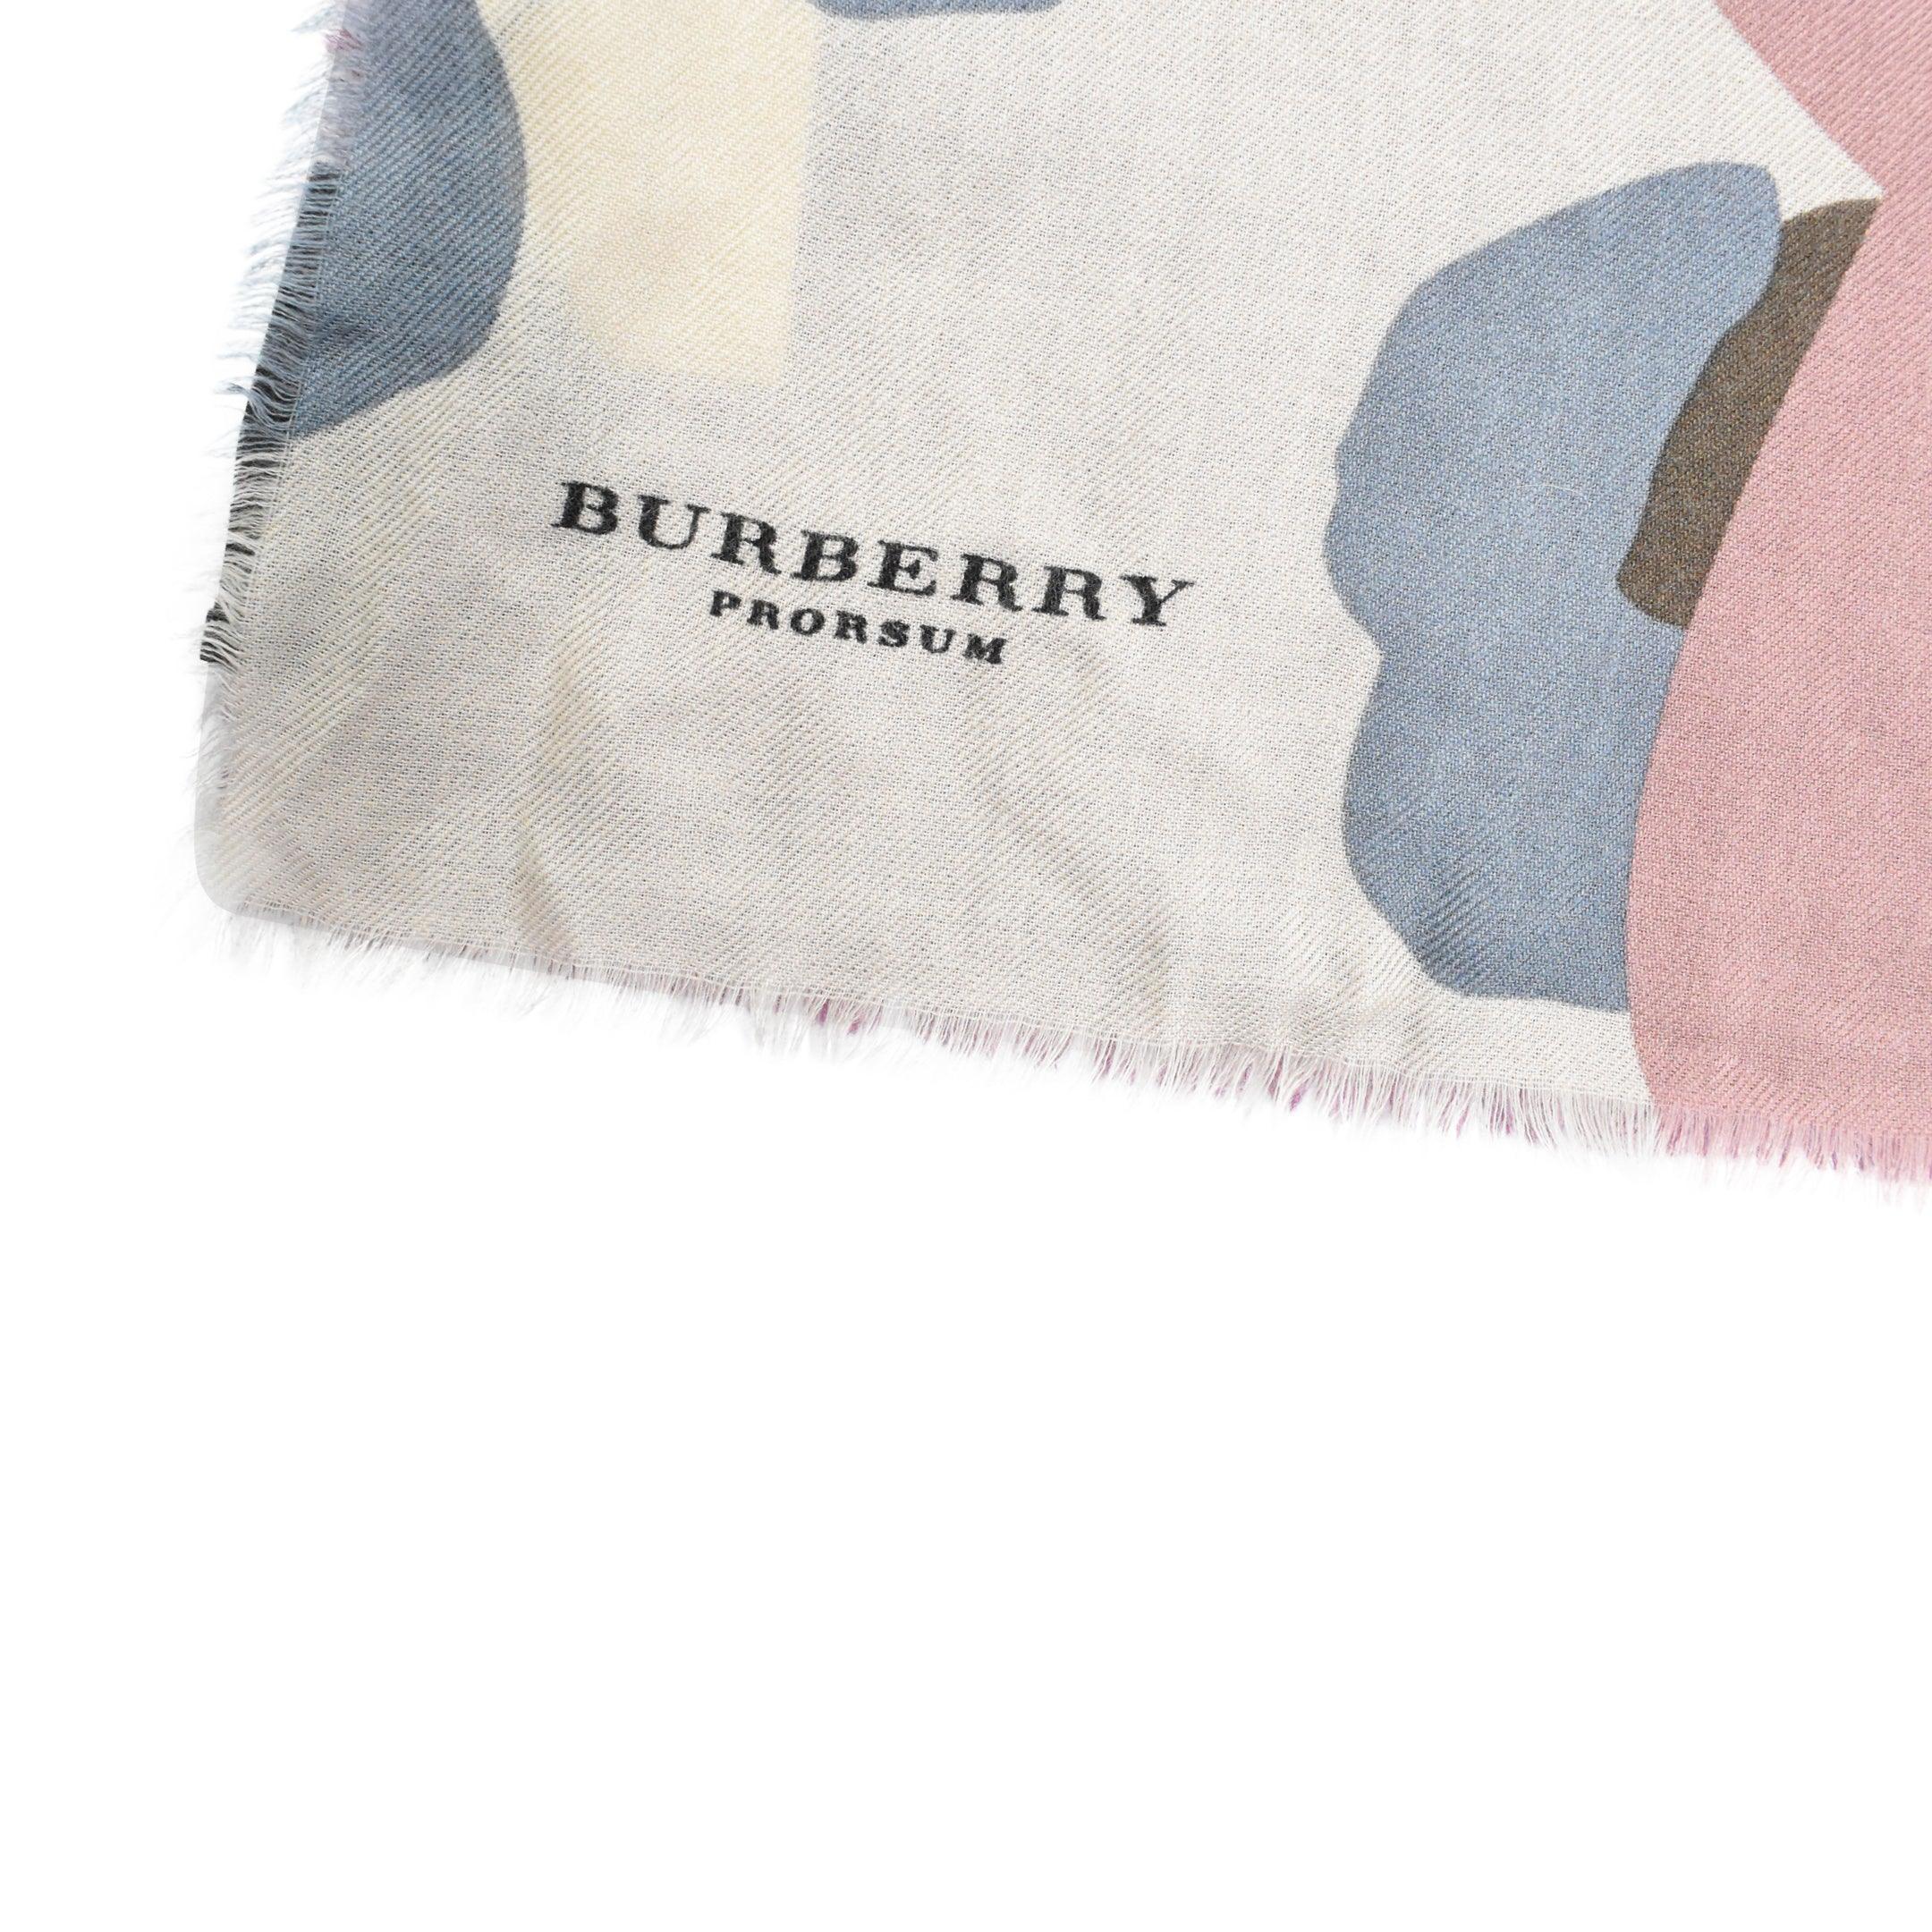 Burberry Prorsum Scarf - Fashionably Yours